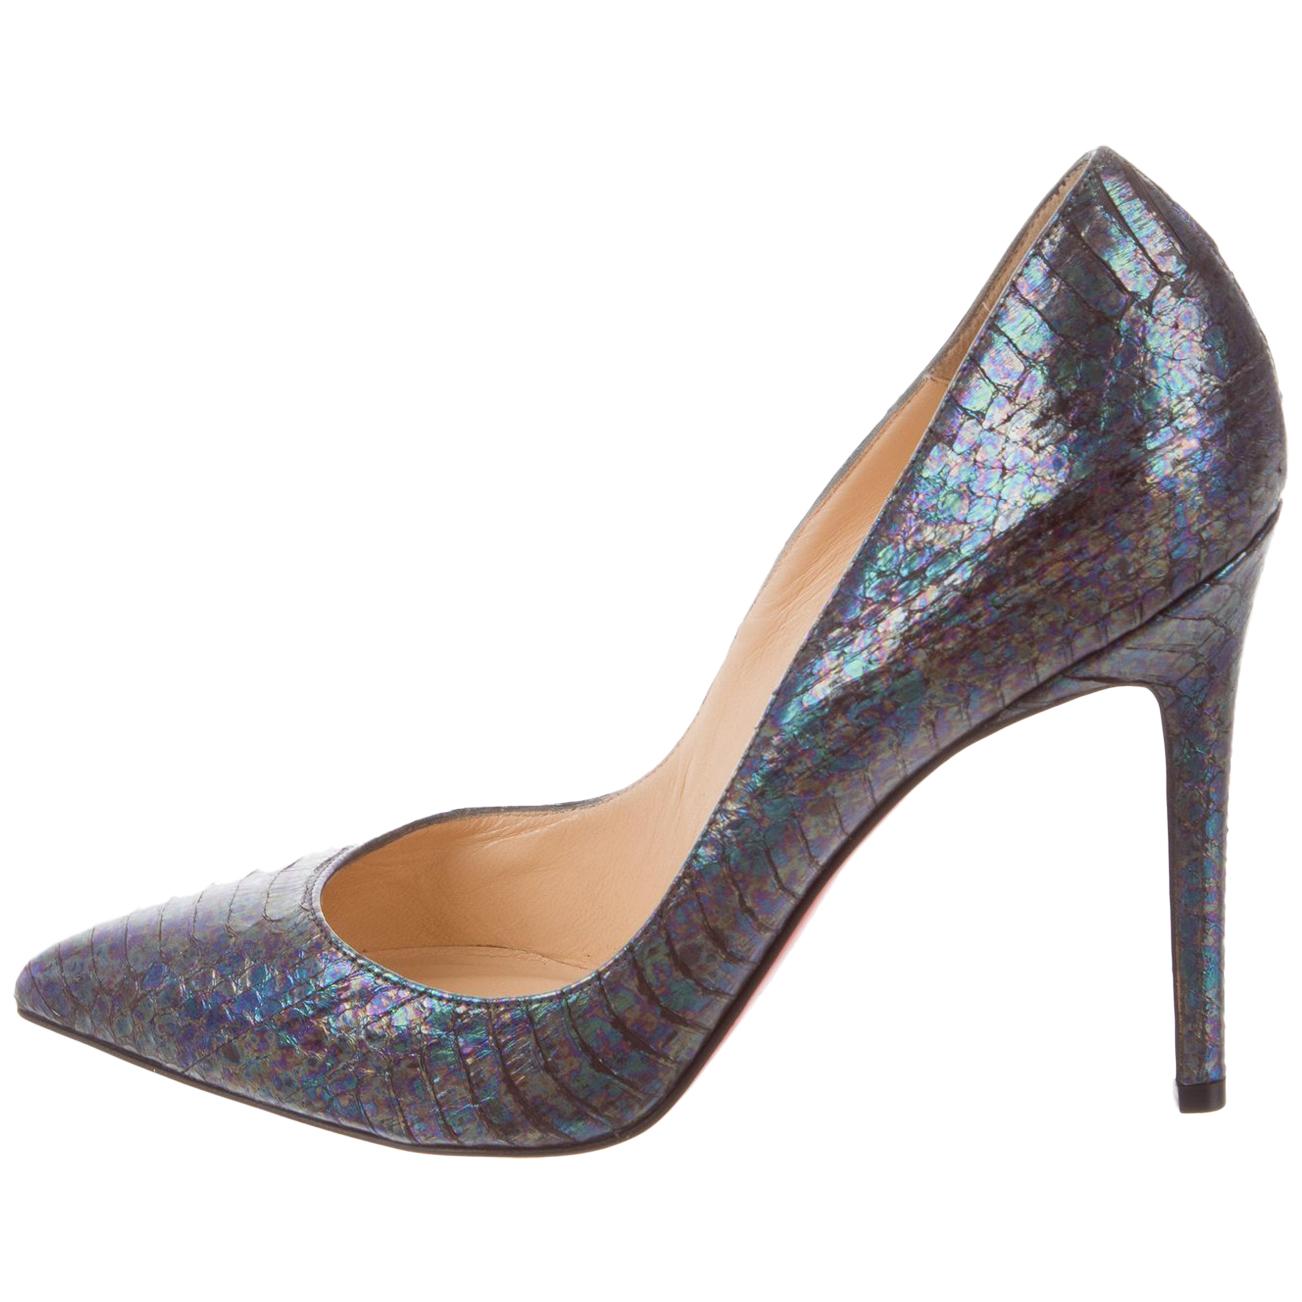 Christian Louboutin NEW MultiColor Iridescent Snake Evening Heels Pumps in Box